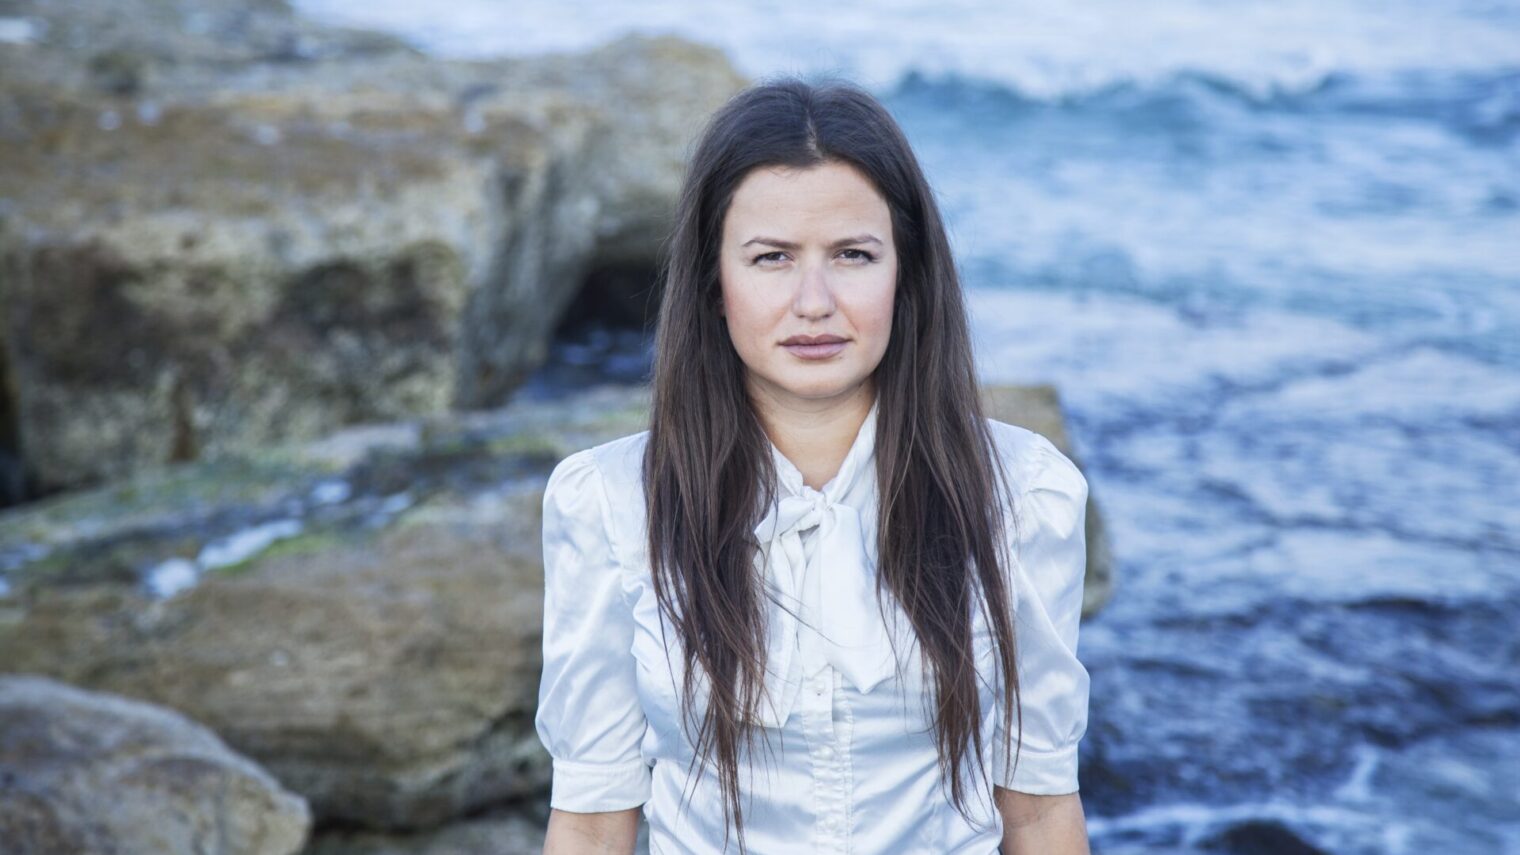 Eco Wave Power founder and CEO Inna Braverman. Photo courtesy of Sustainable Markets Initiative